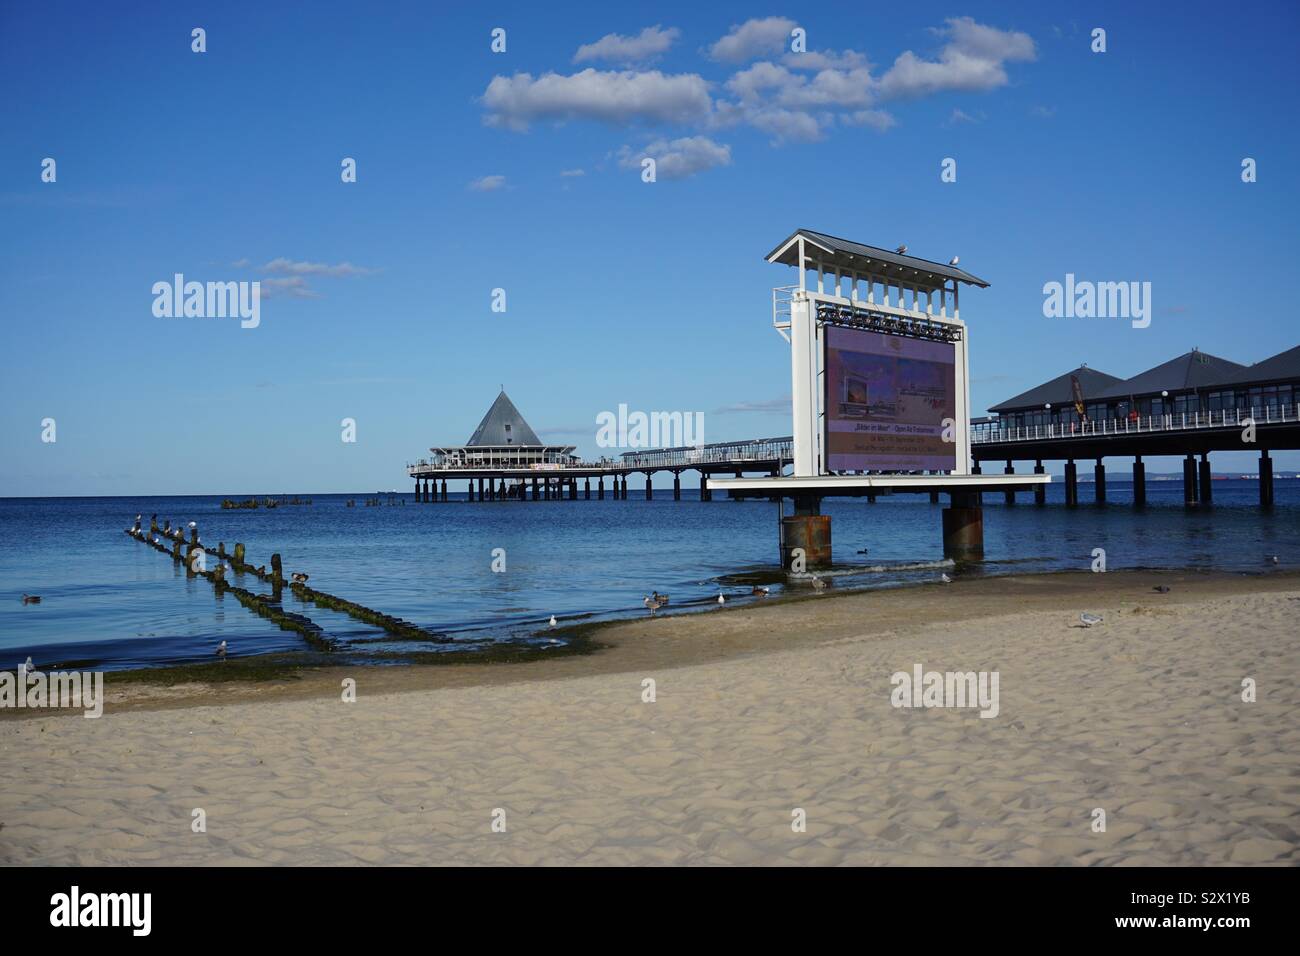 In the year 2018 construction of a Video Wall for open air photo shows ( Bilder im Meer) in the Baltic Sea next to the Pier of Heringsdorf, Usedom, Mecklenburg Vorpommern, Germany, Europe Stock Photo